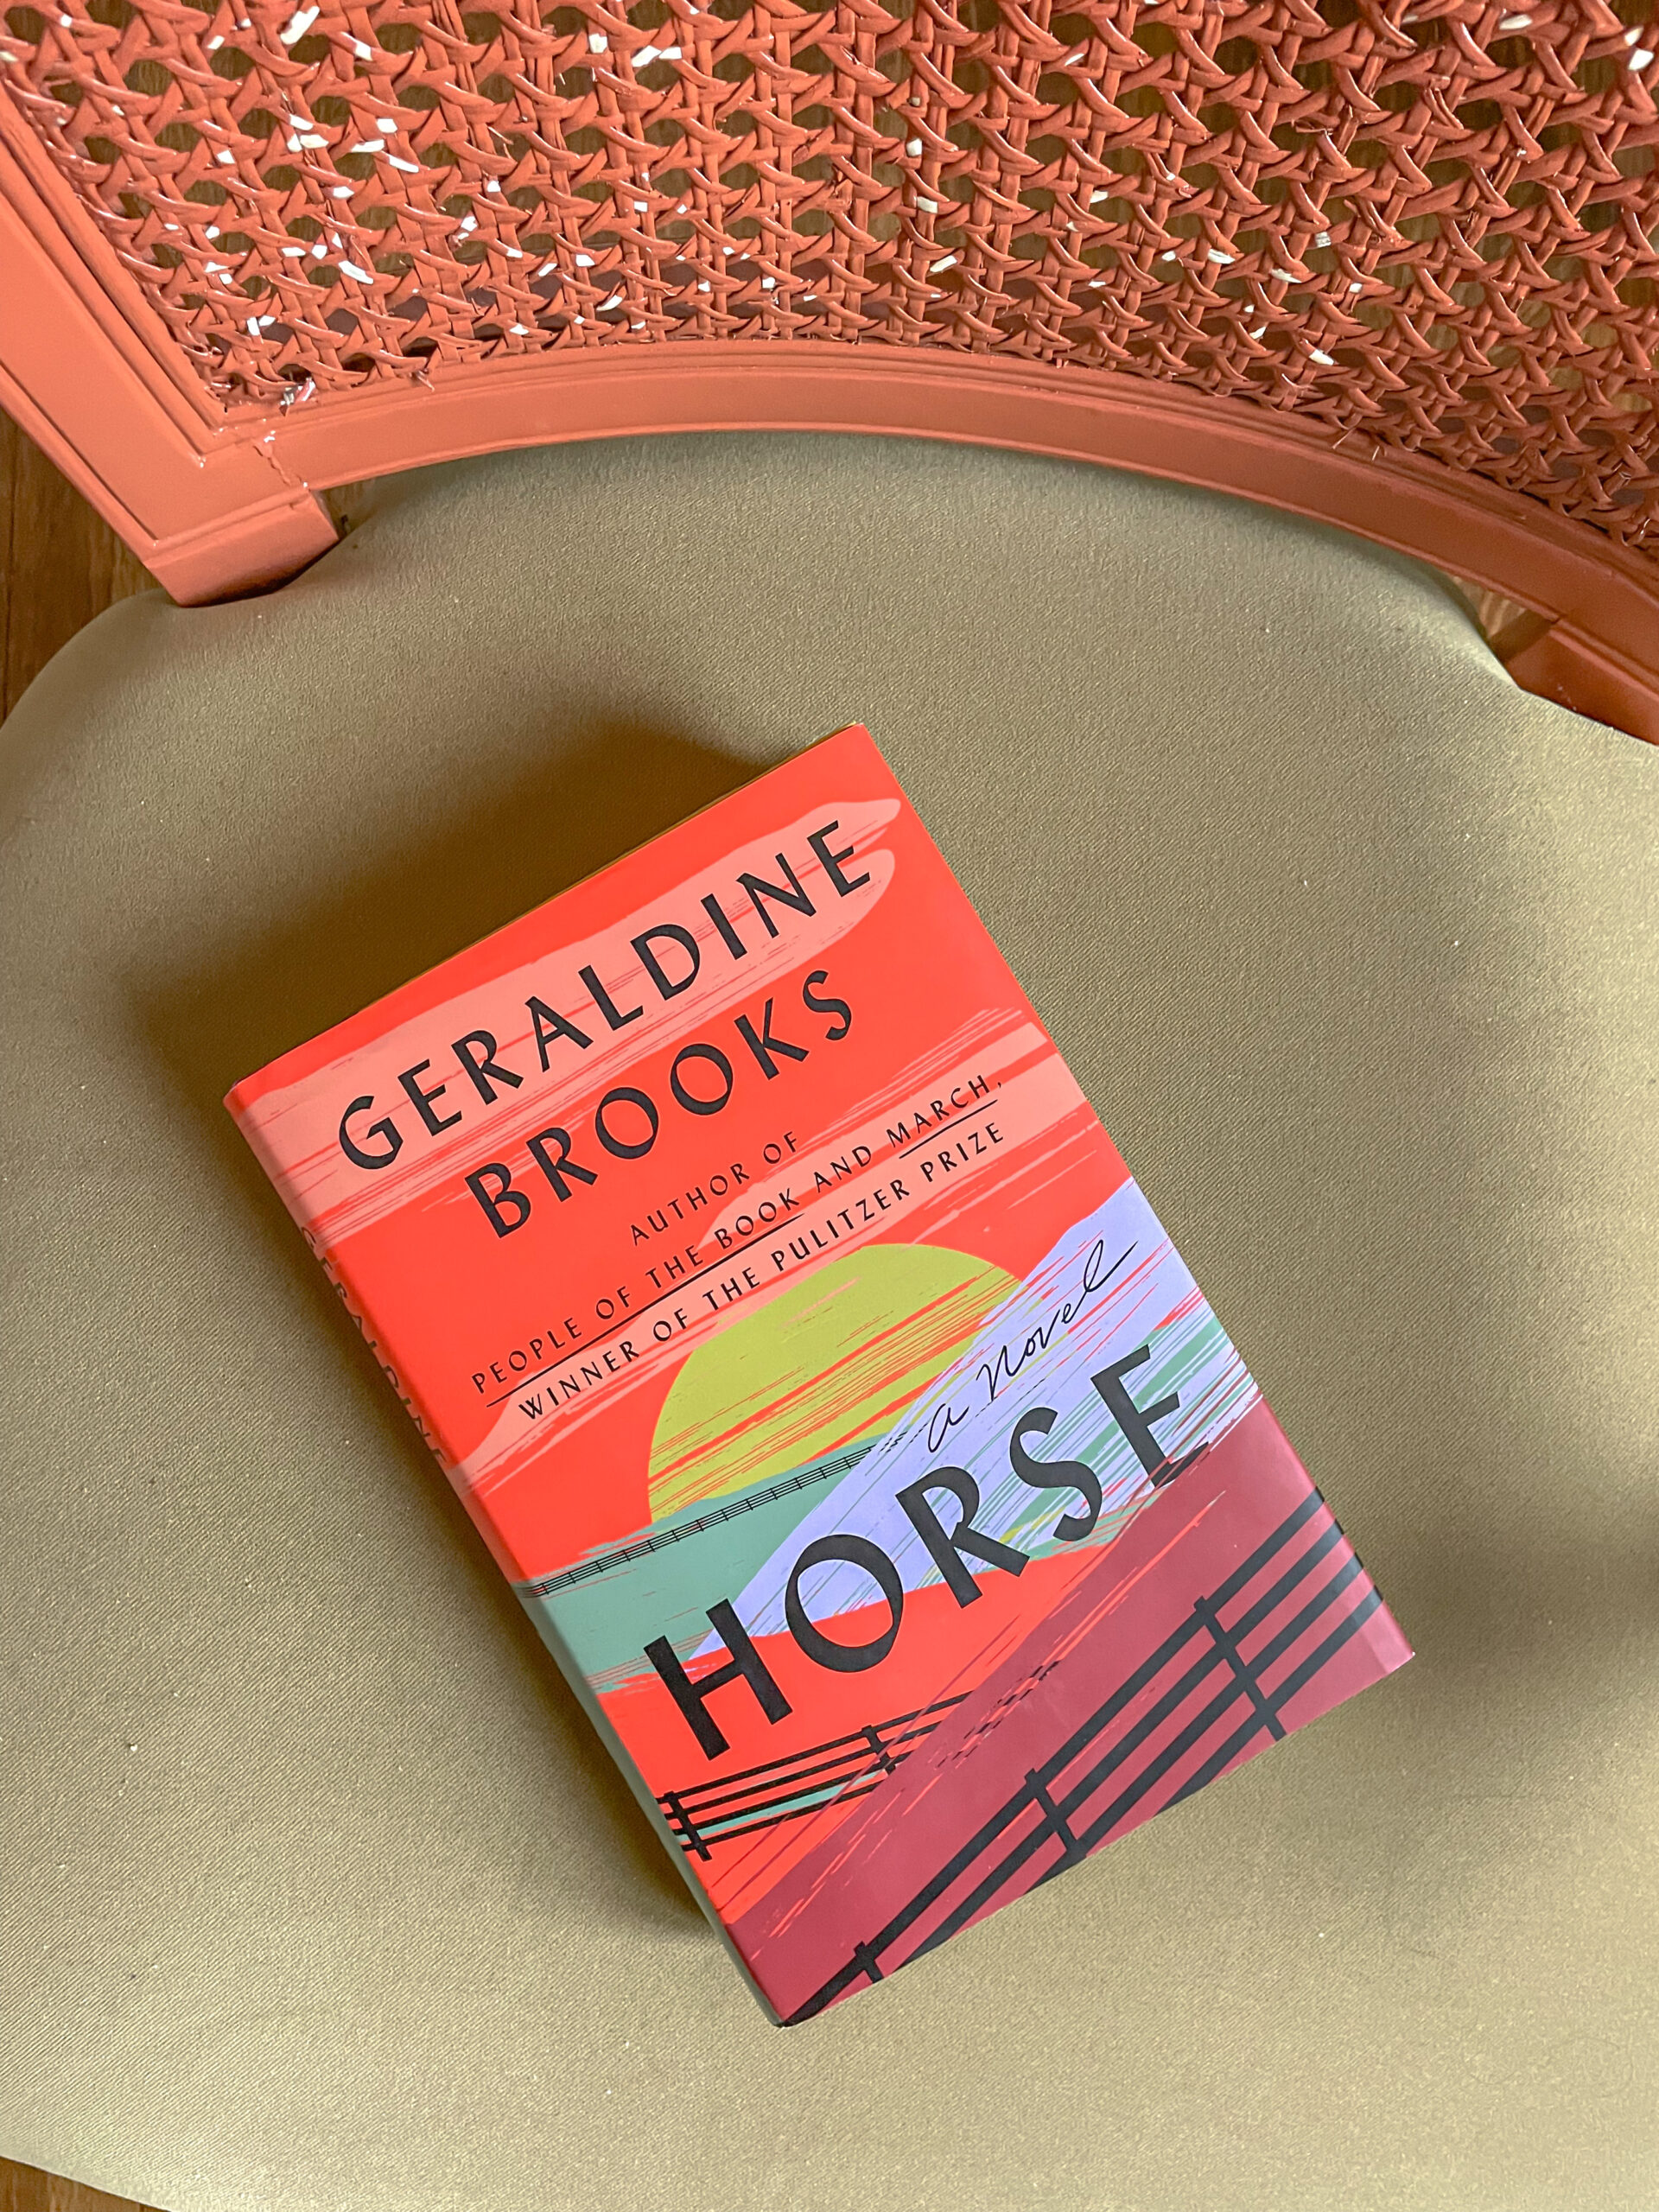 Horse by Geraldine Brooks, Contemporary Fiction Review, Book Review